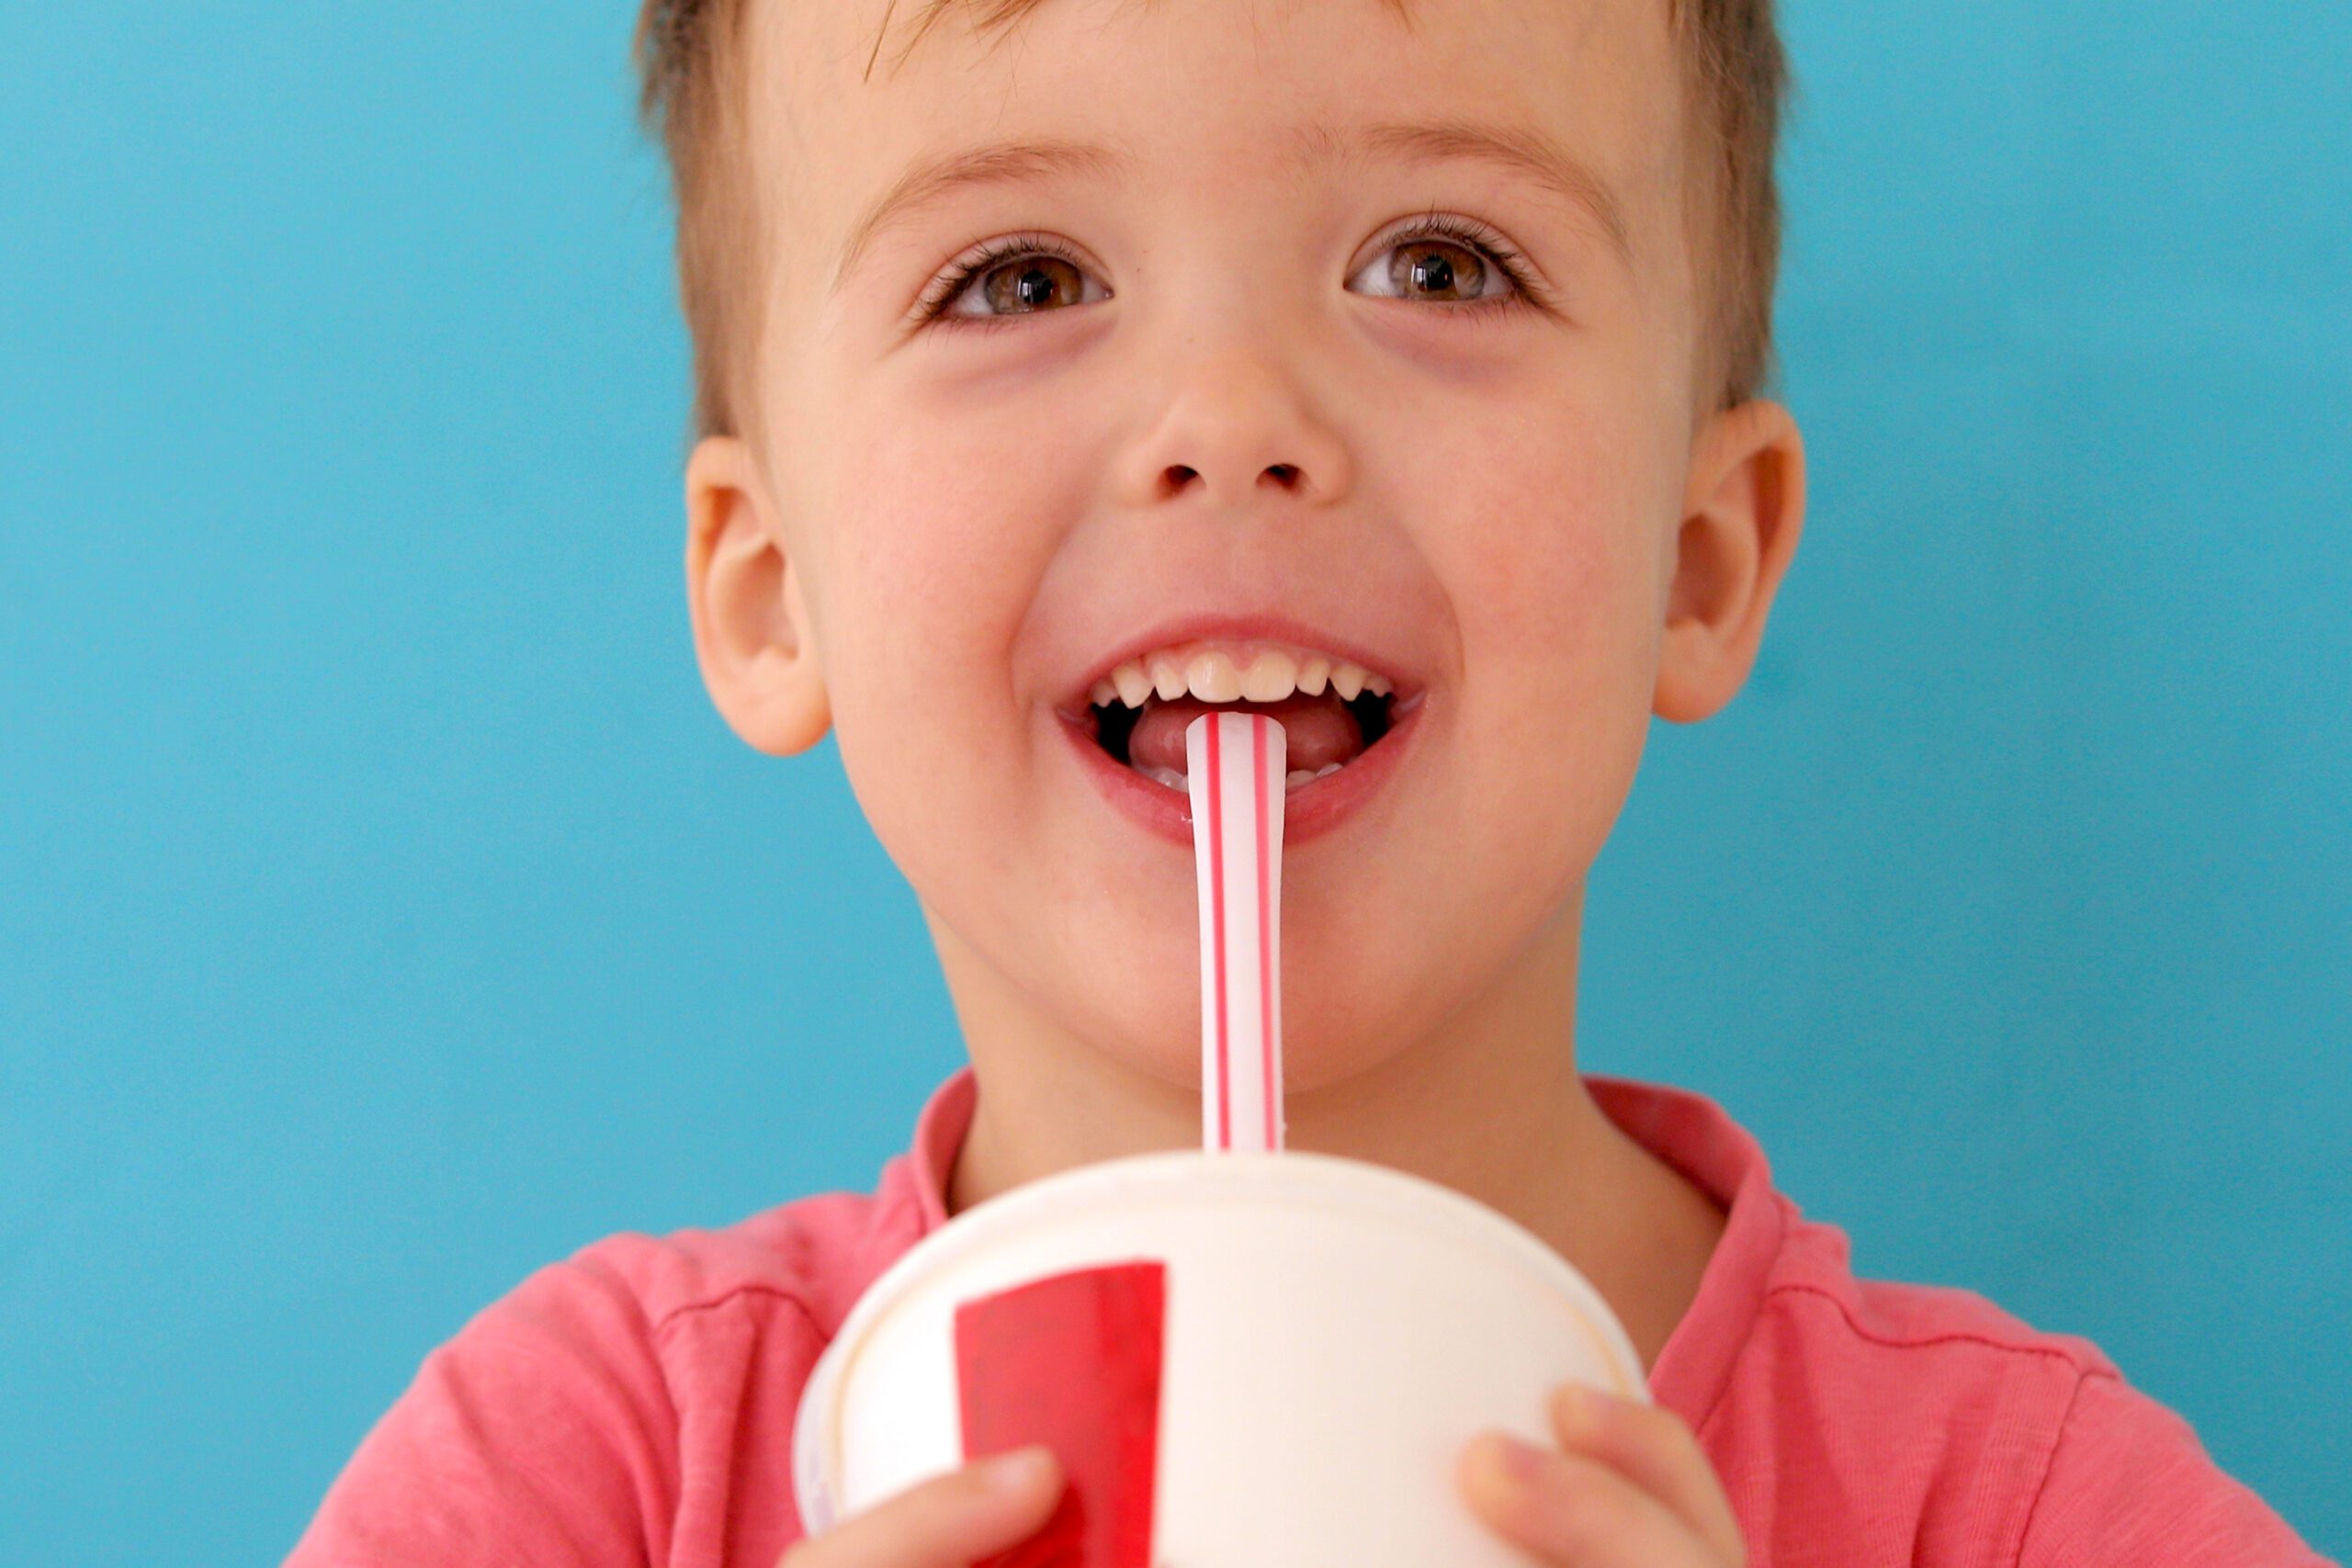 Foods and Beverages That Damage Children's Teeth